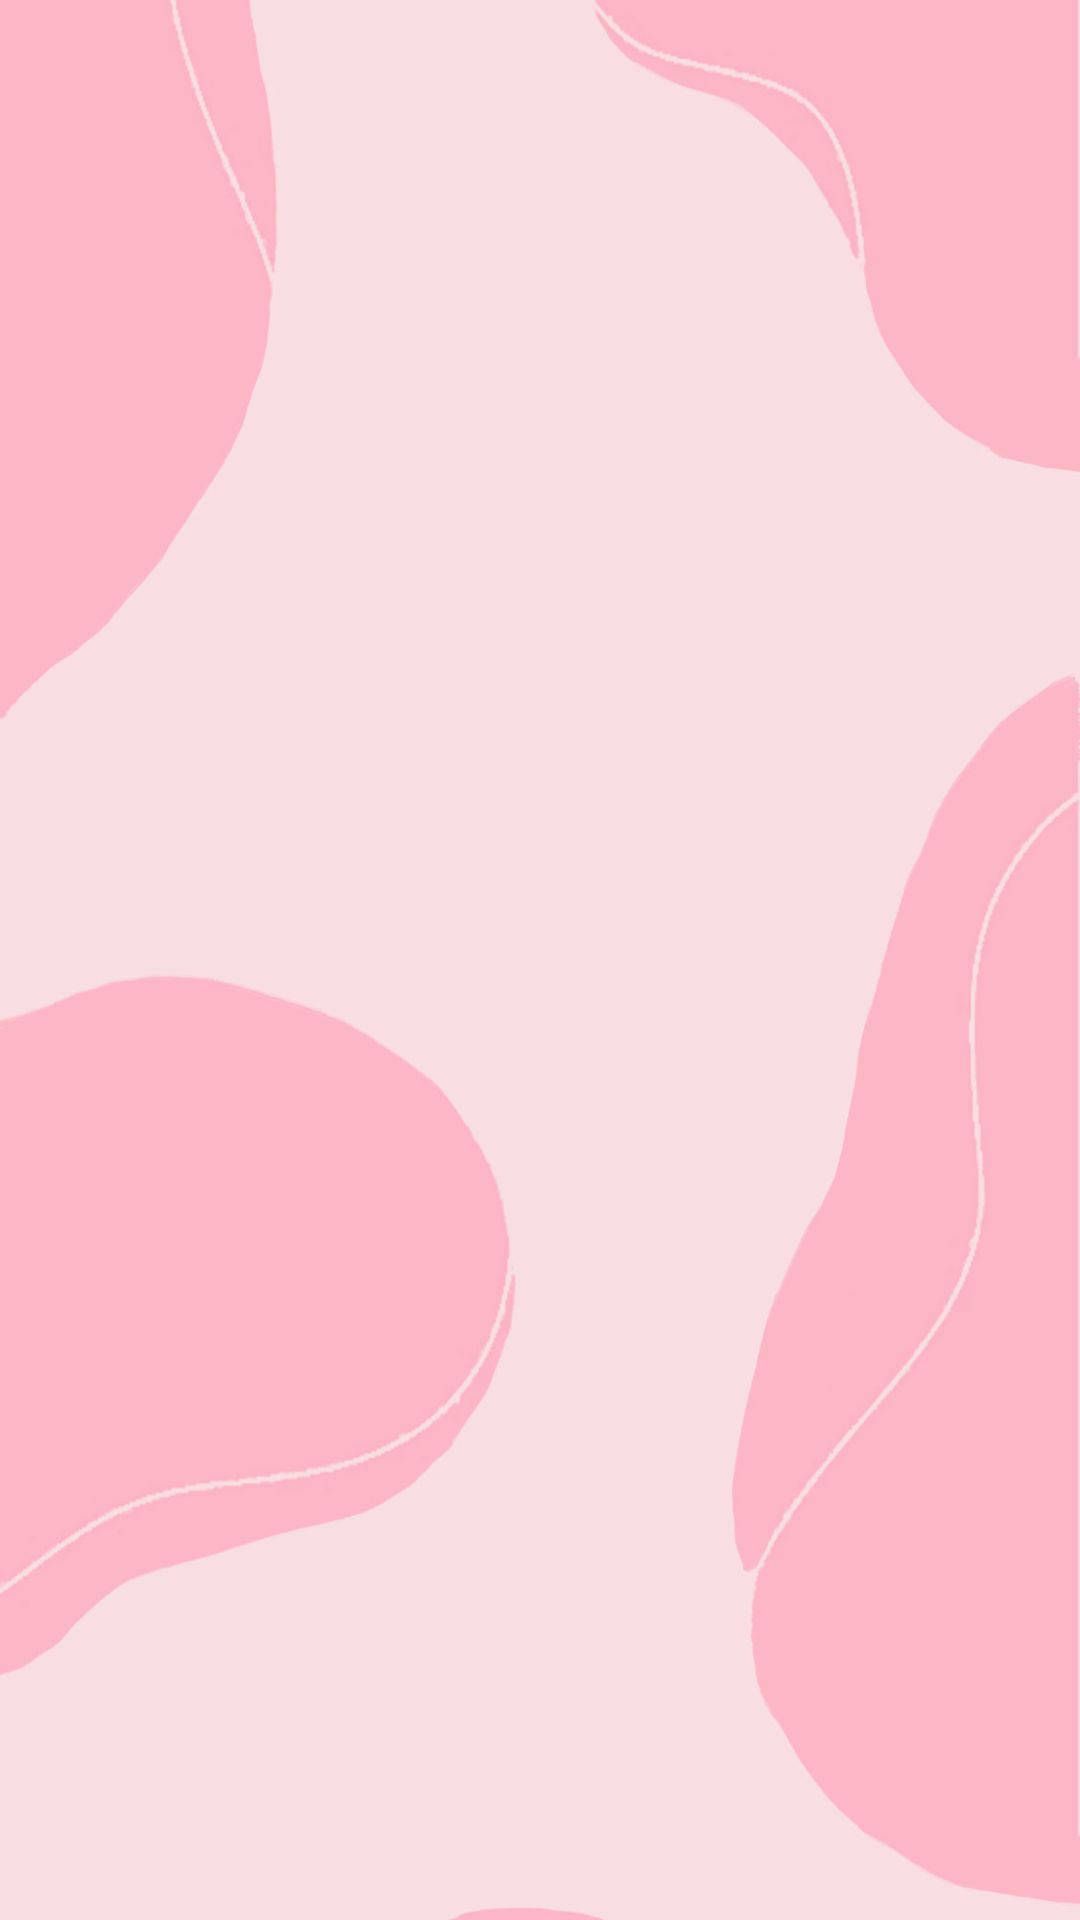 Download Aesthetic Pink Abstract Wallpaper